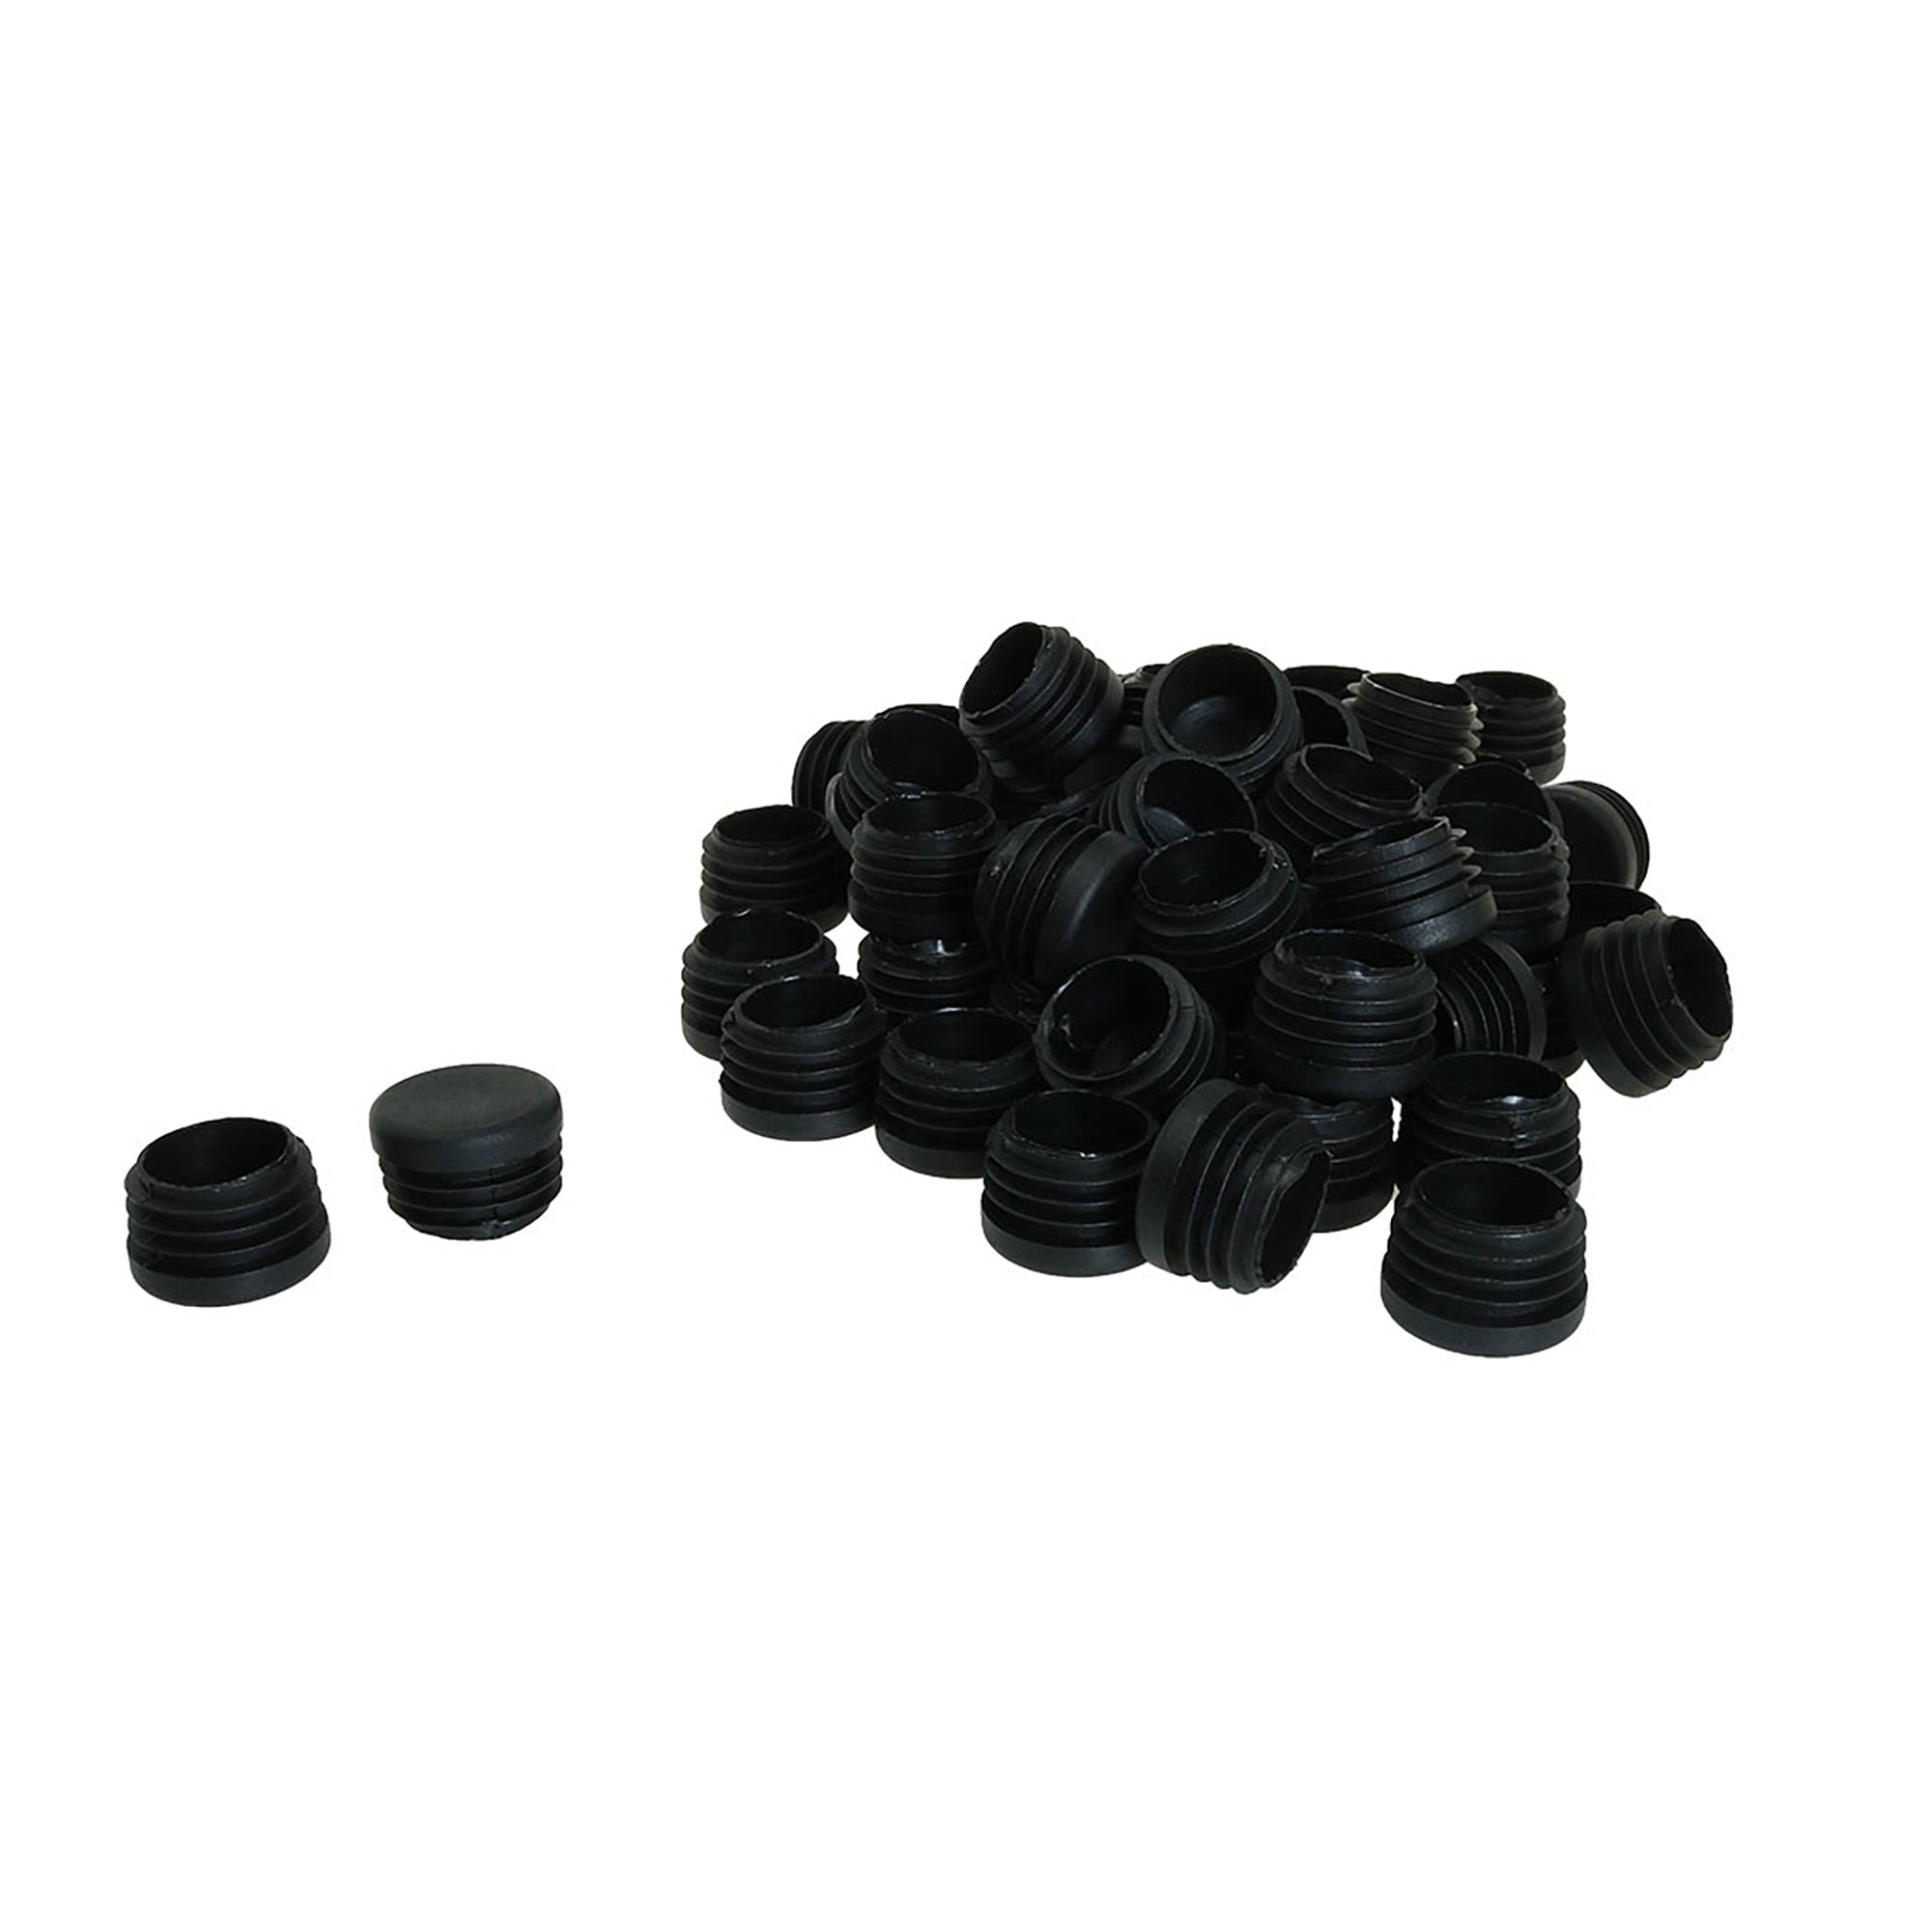 10x Conical Recessed Rubber Feet Bumpers Pads For Furniture Table Chair Desk HU 